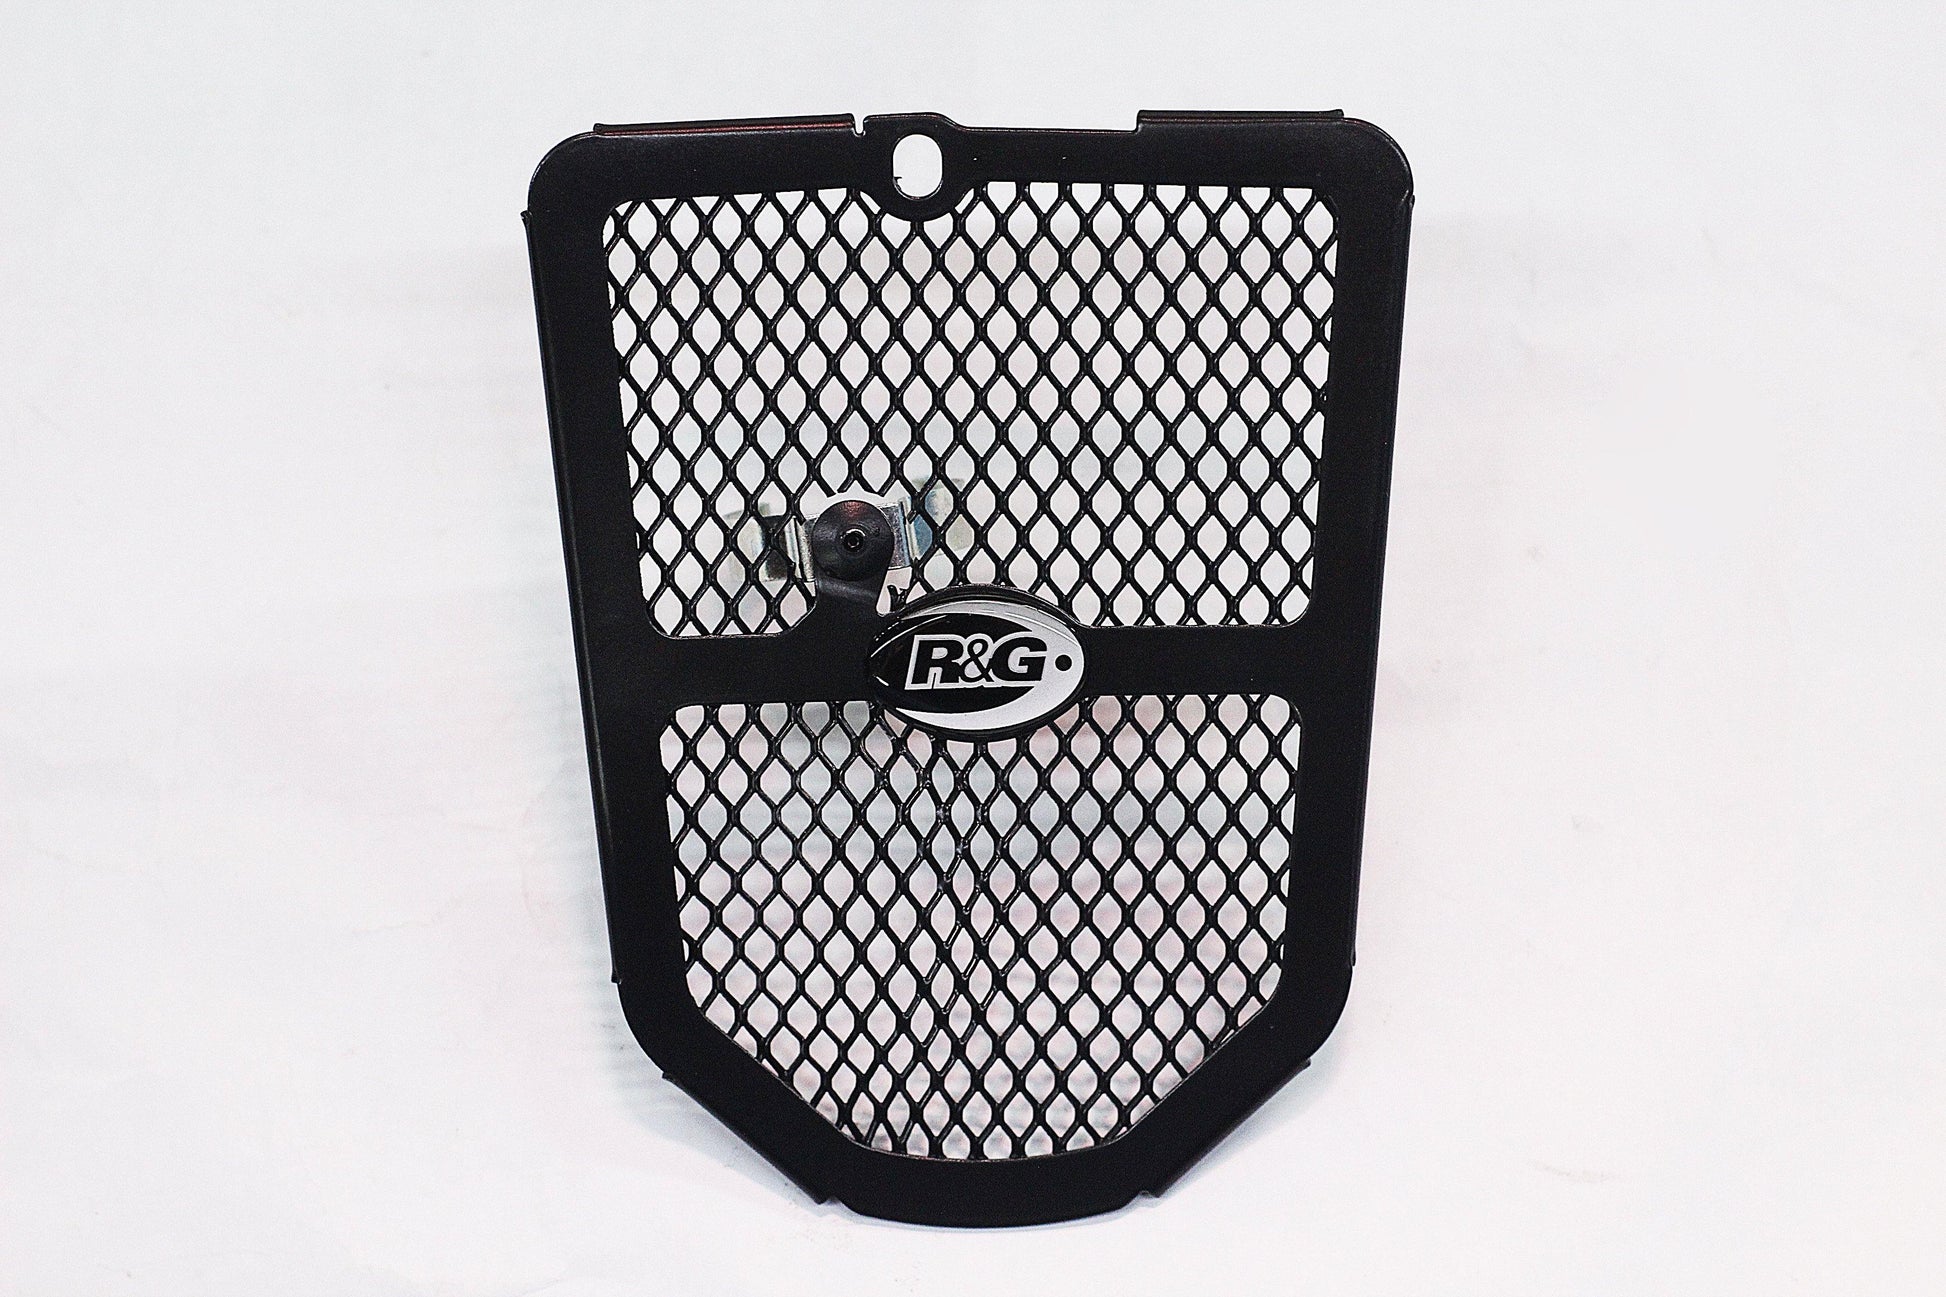 R&G Downpipe Grille fits for Honda CBR1000RR / RR SP / RR SP2 ('17-) - Durian Bikers